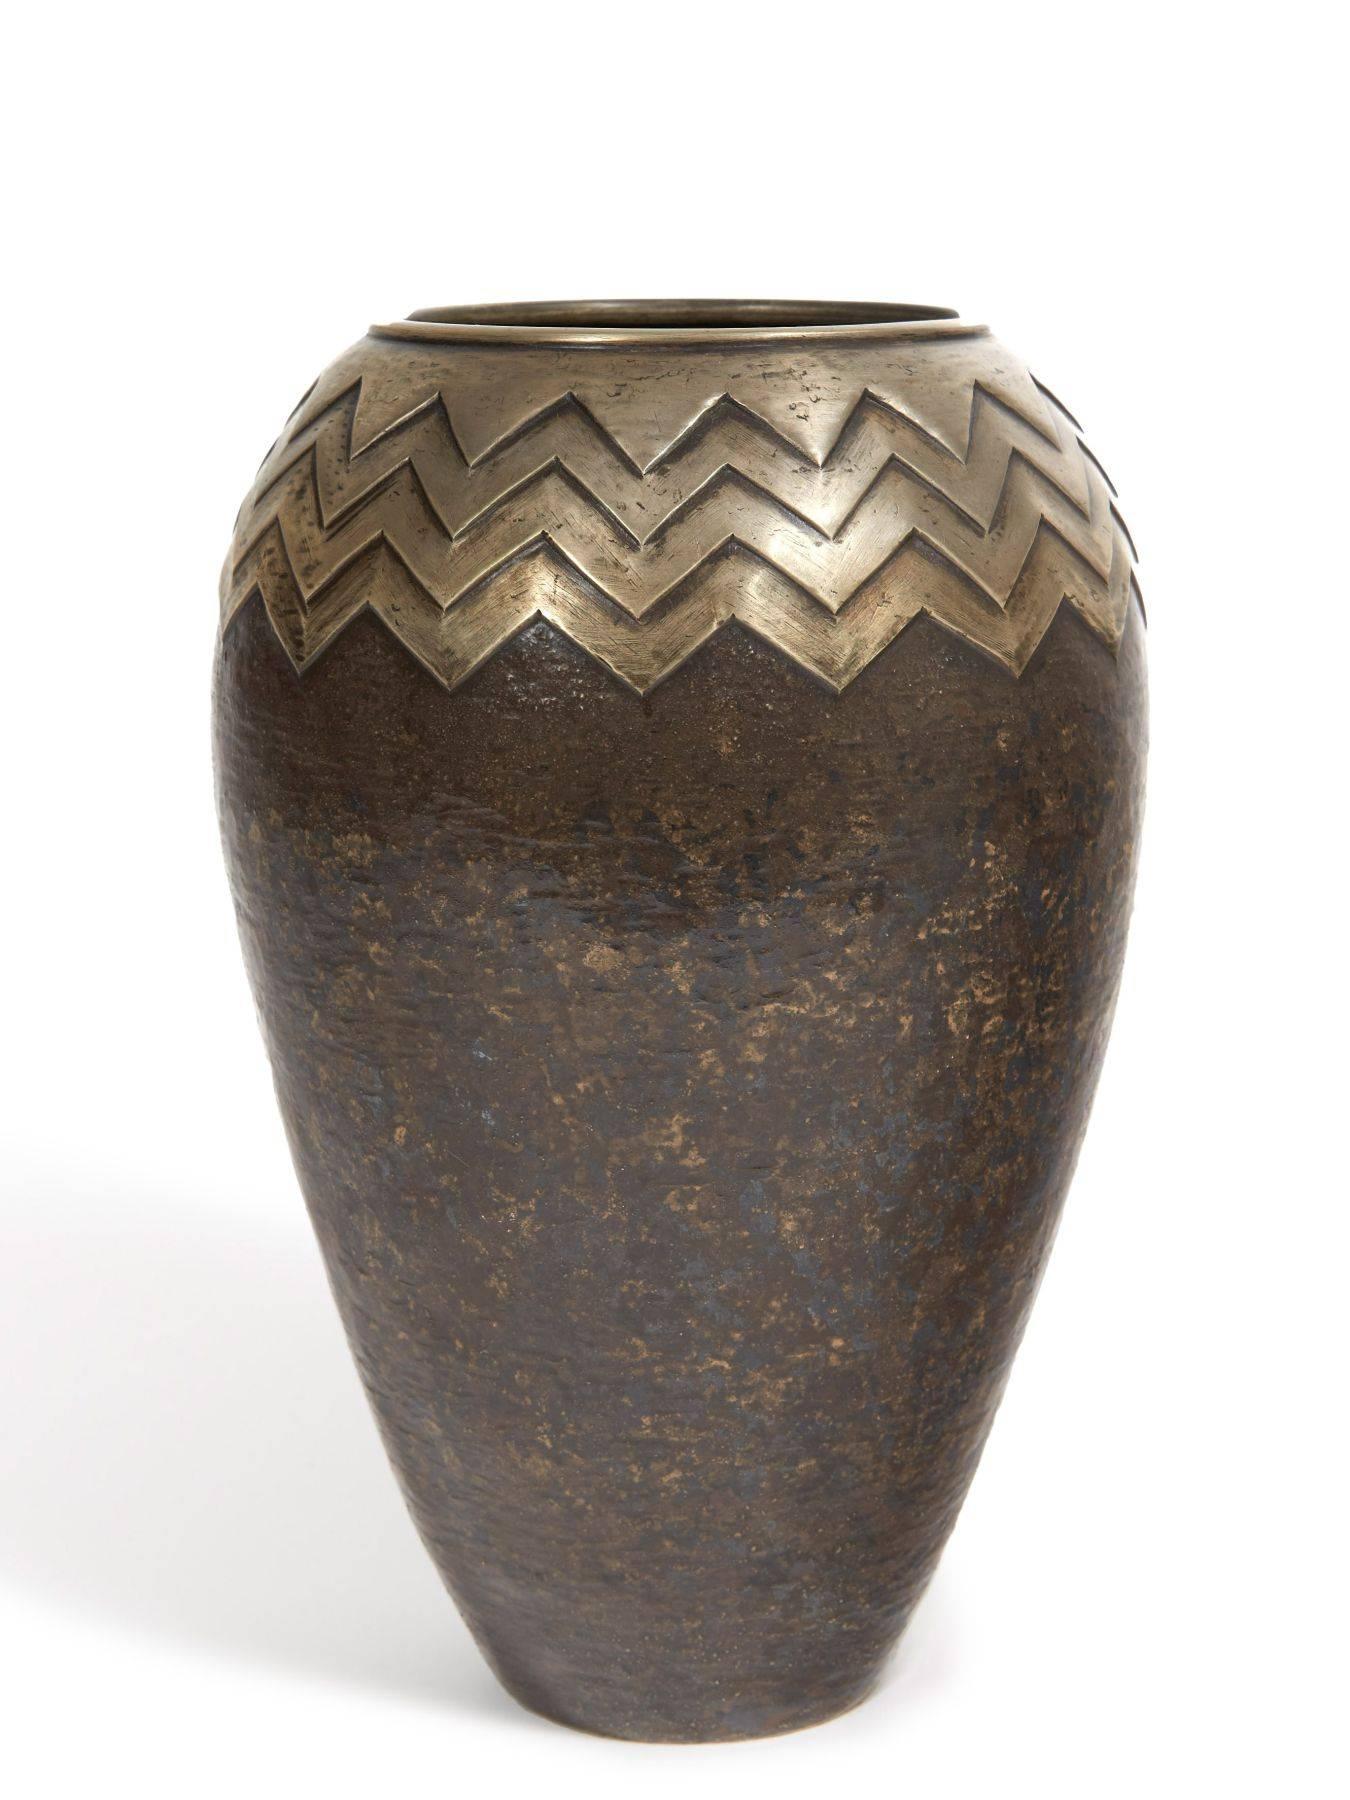 A copper Dinanderie vase with herringbone pattern.
Signed CL-Linossier under the base.